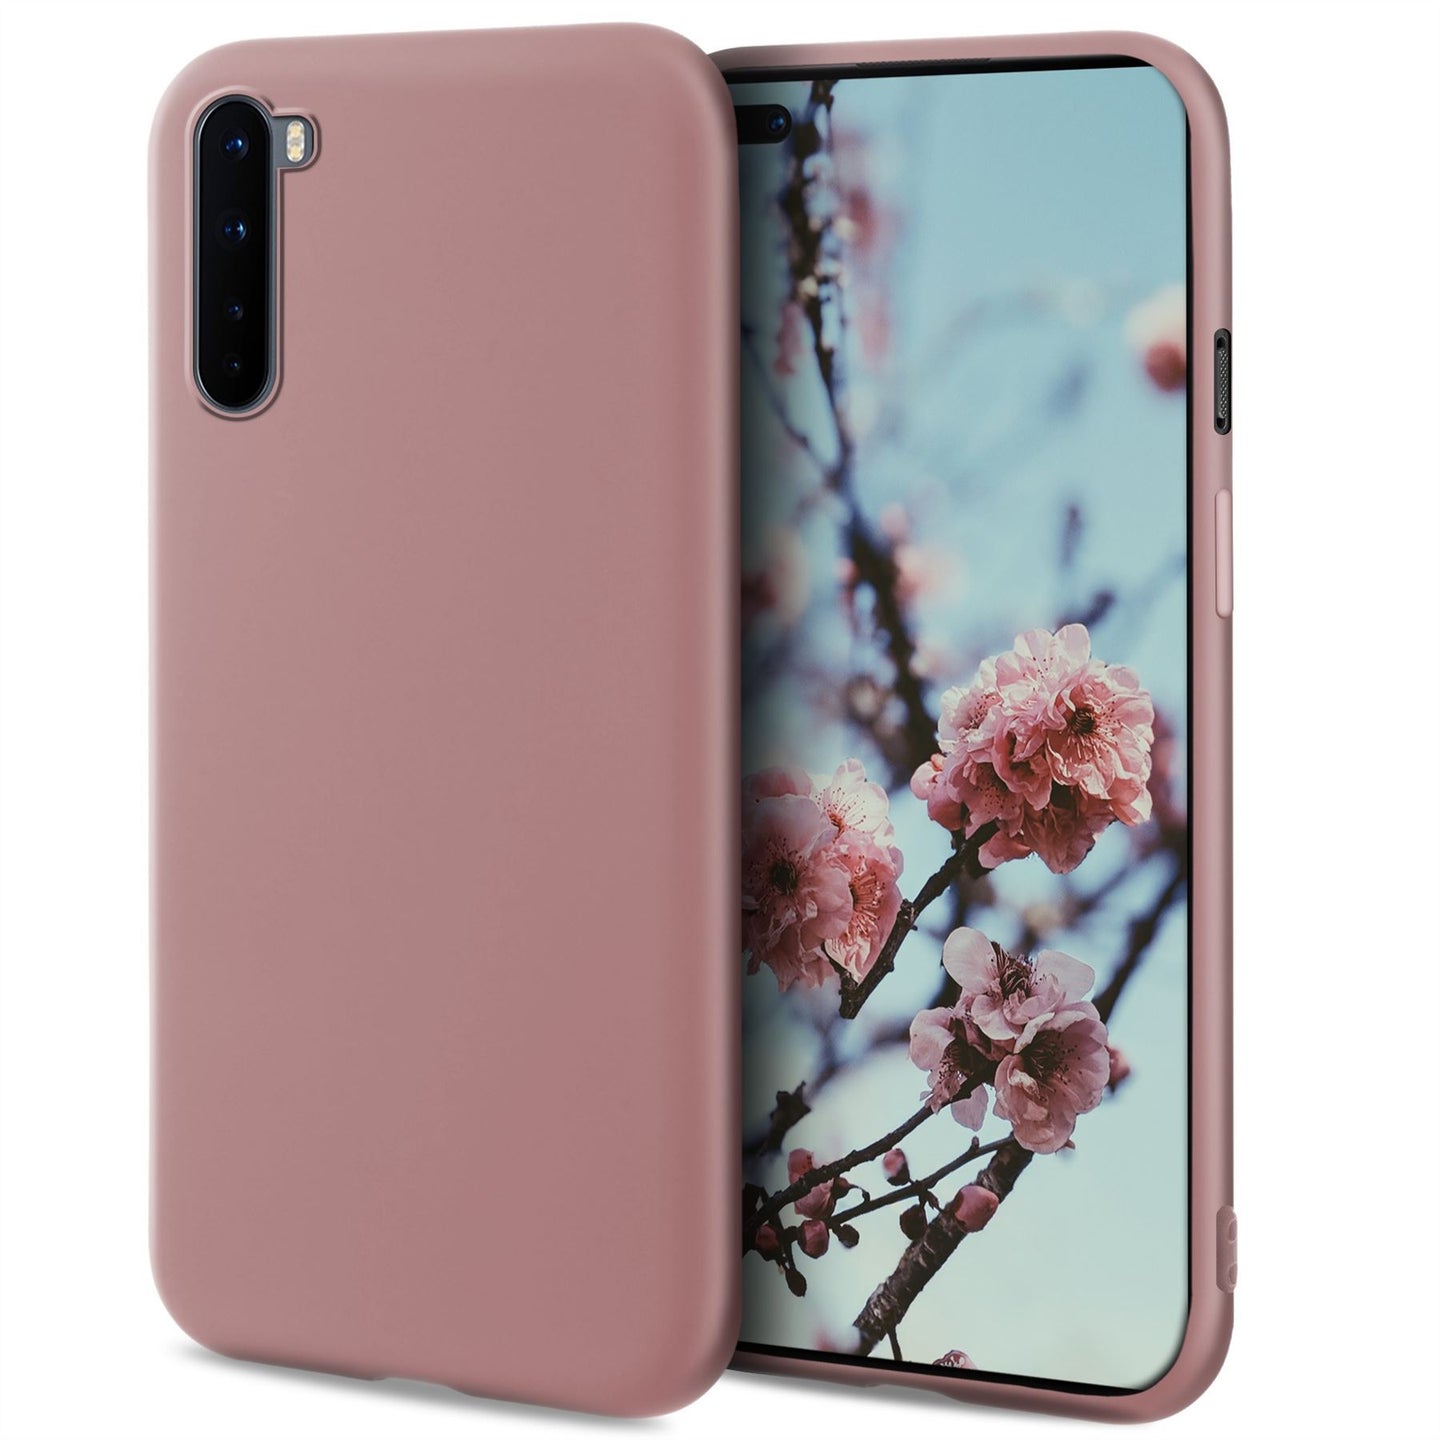 Moozy Minimalist Series Silicone Case for OnePlus Nord, Rose Beige - Matte Finish Slim Soft TPU Cover